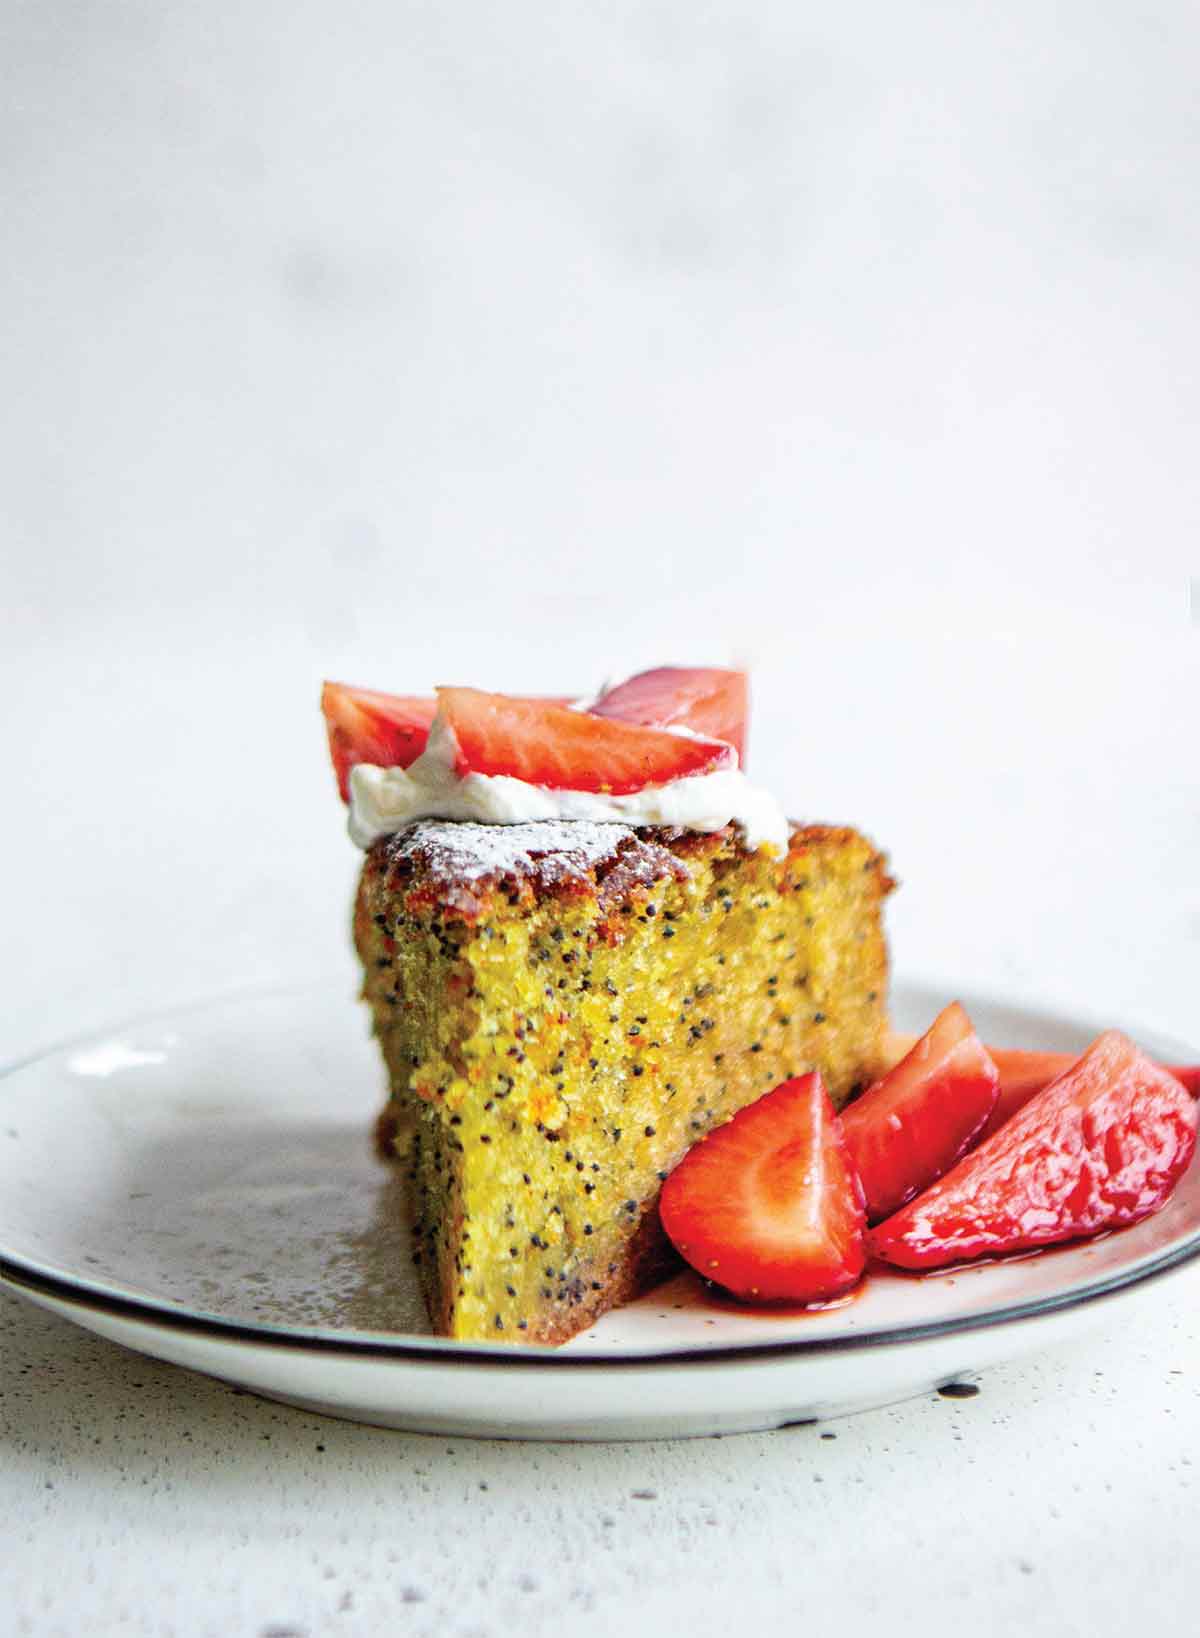 A slice of orange, olive oil, and poppyseed cake with sliced strawberries on the side on a white plate